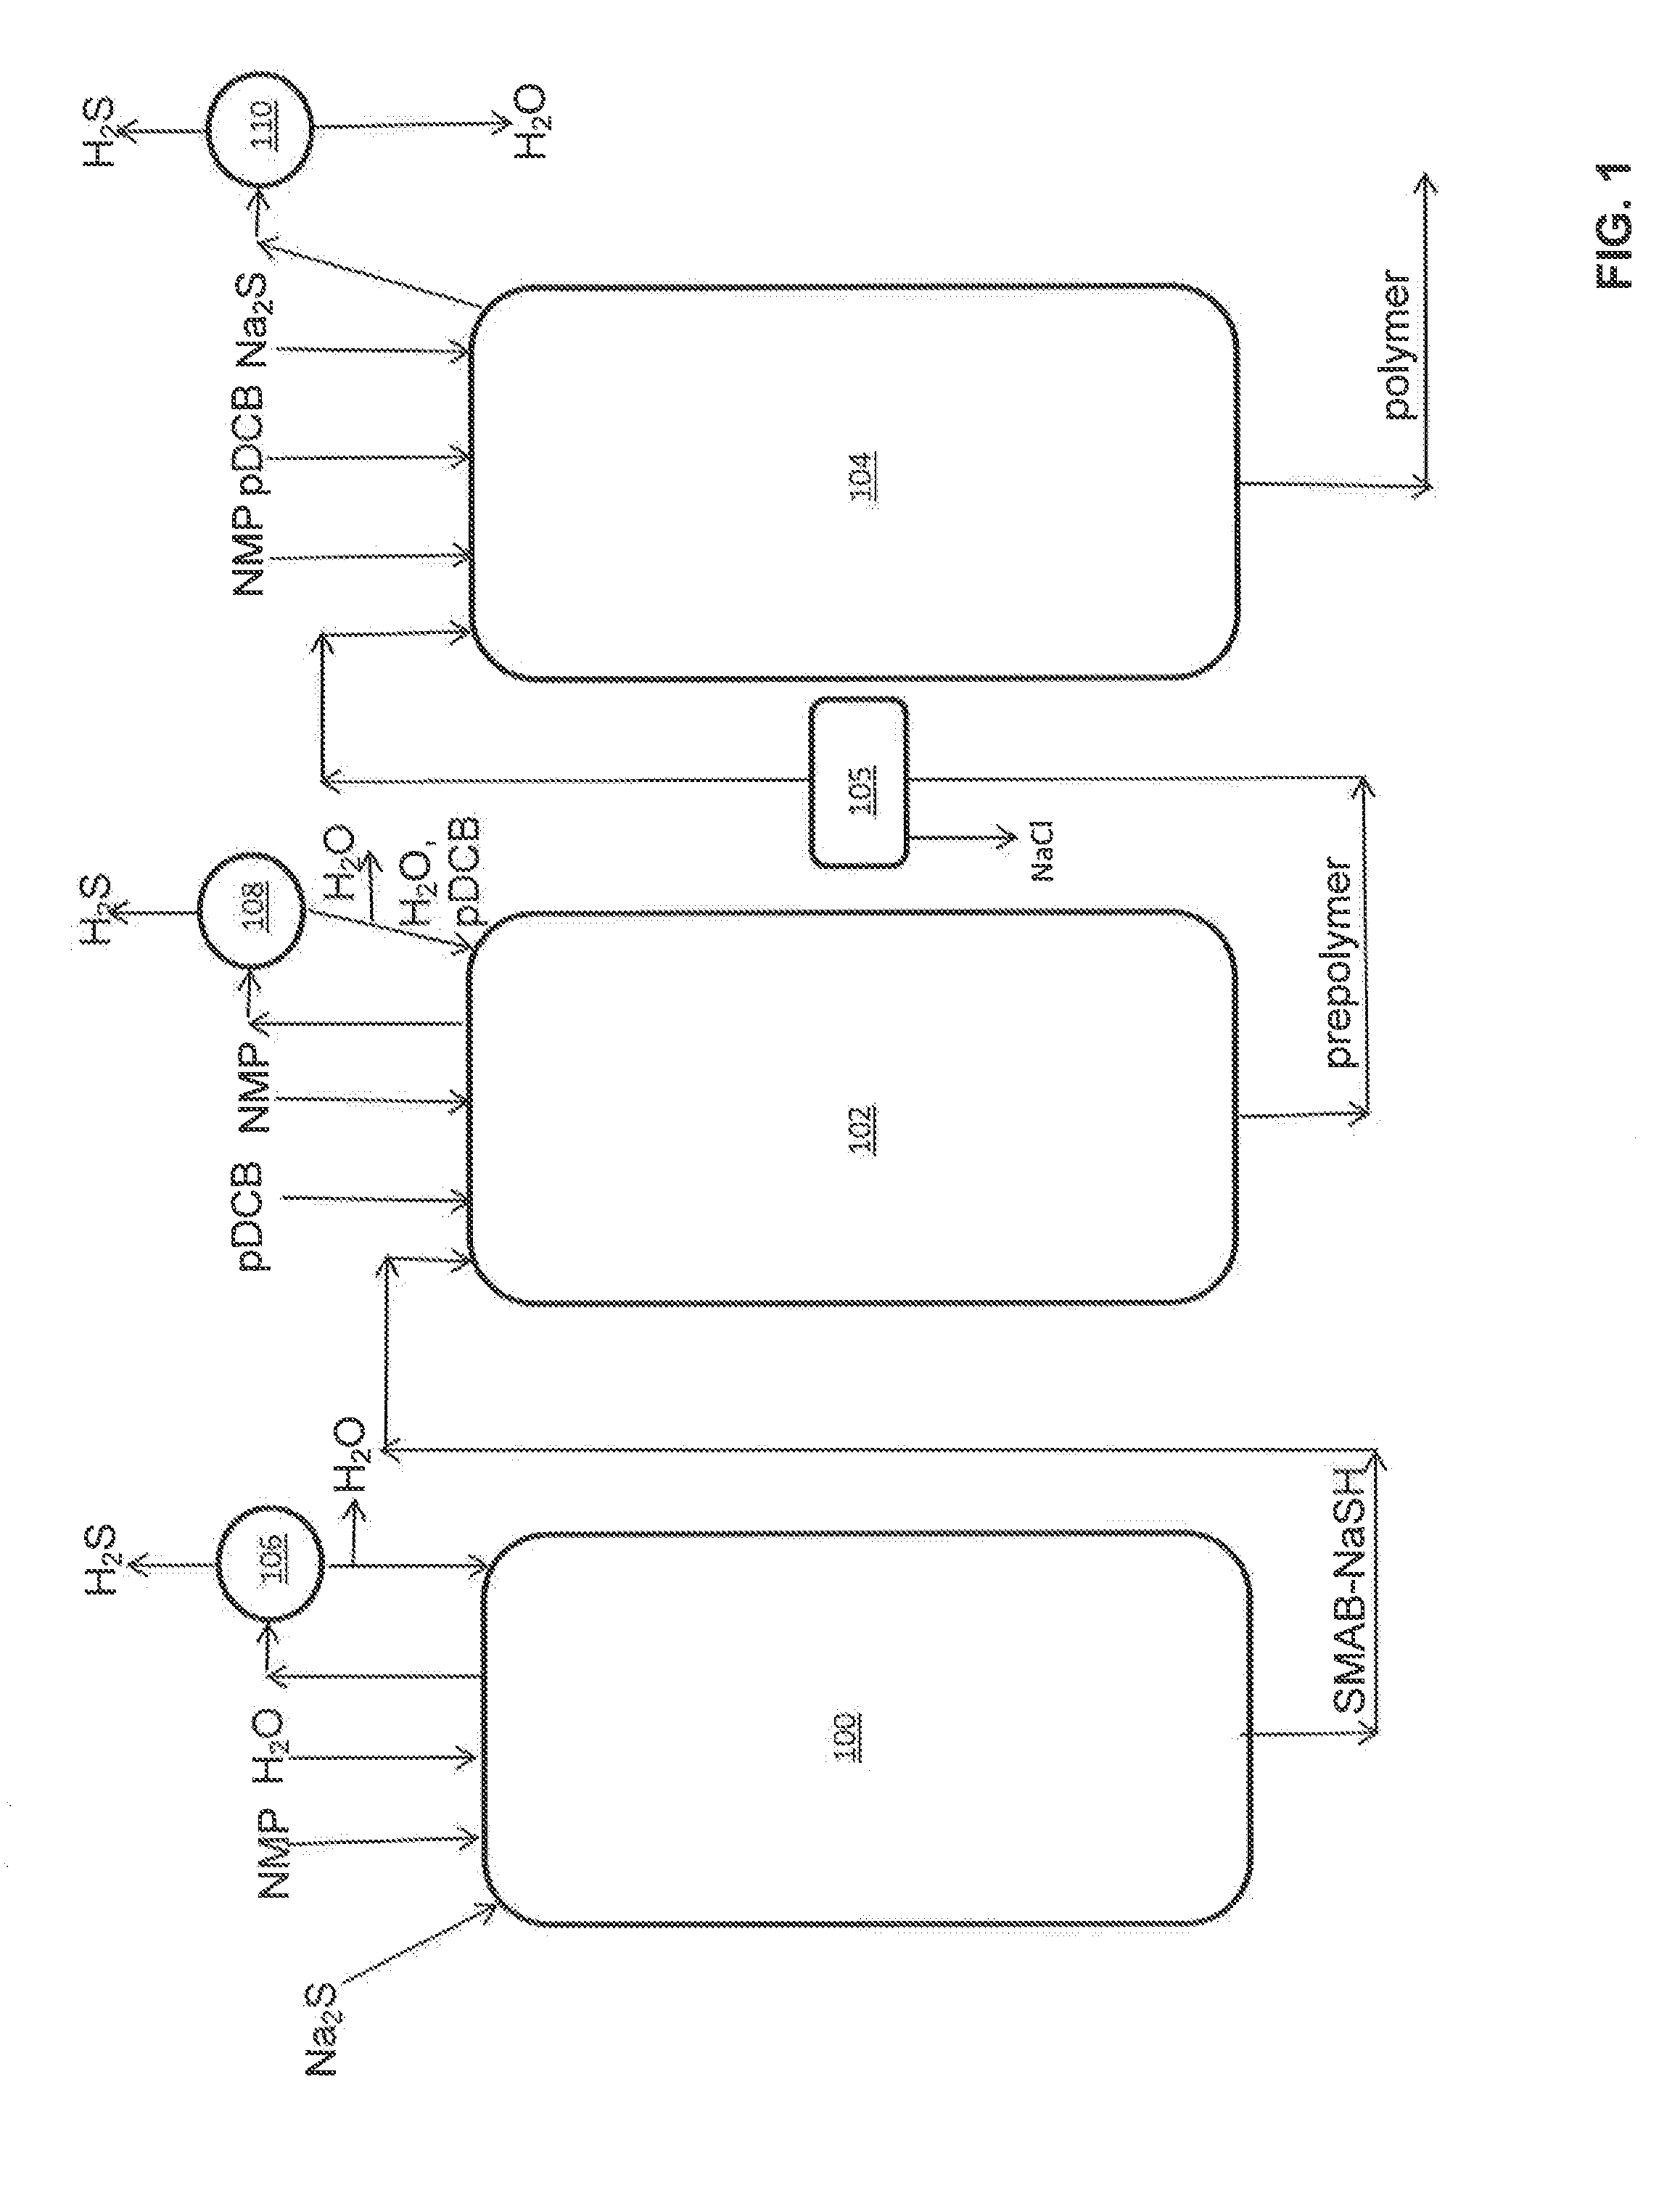 Process for forming low halogen content polyarylene sulfides